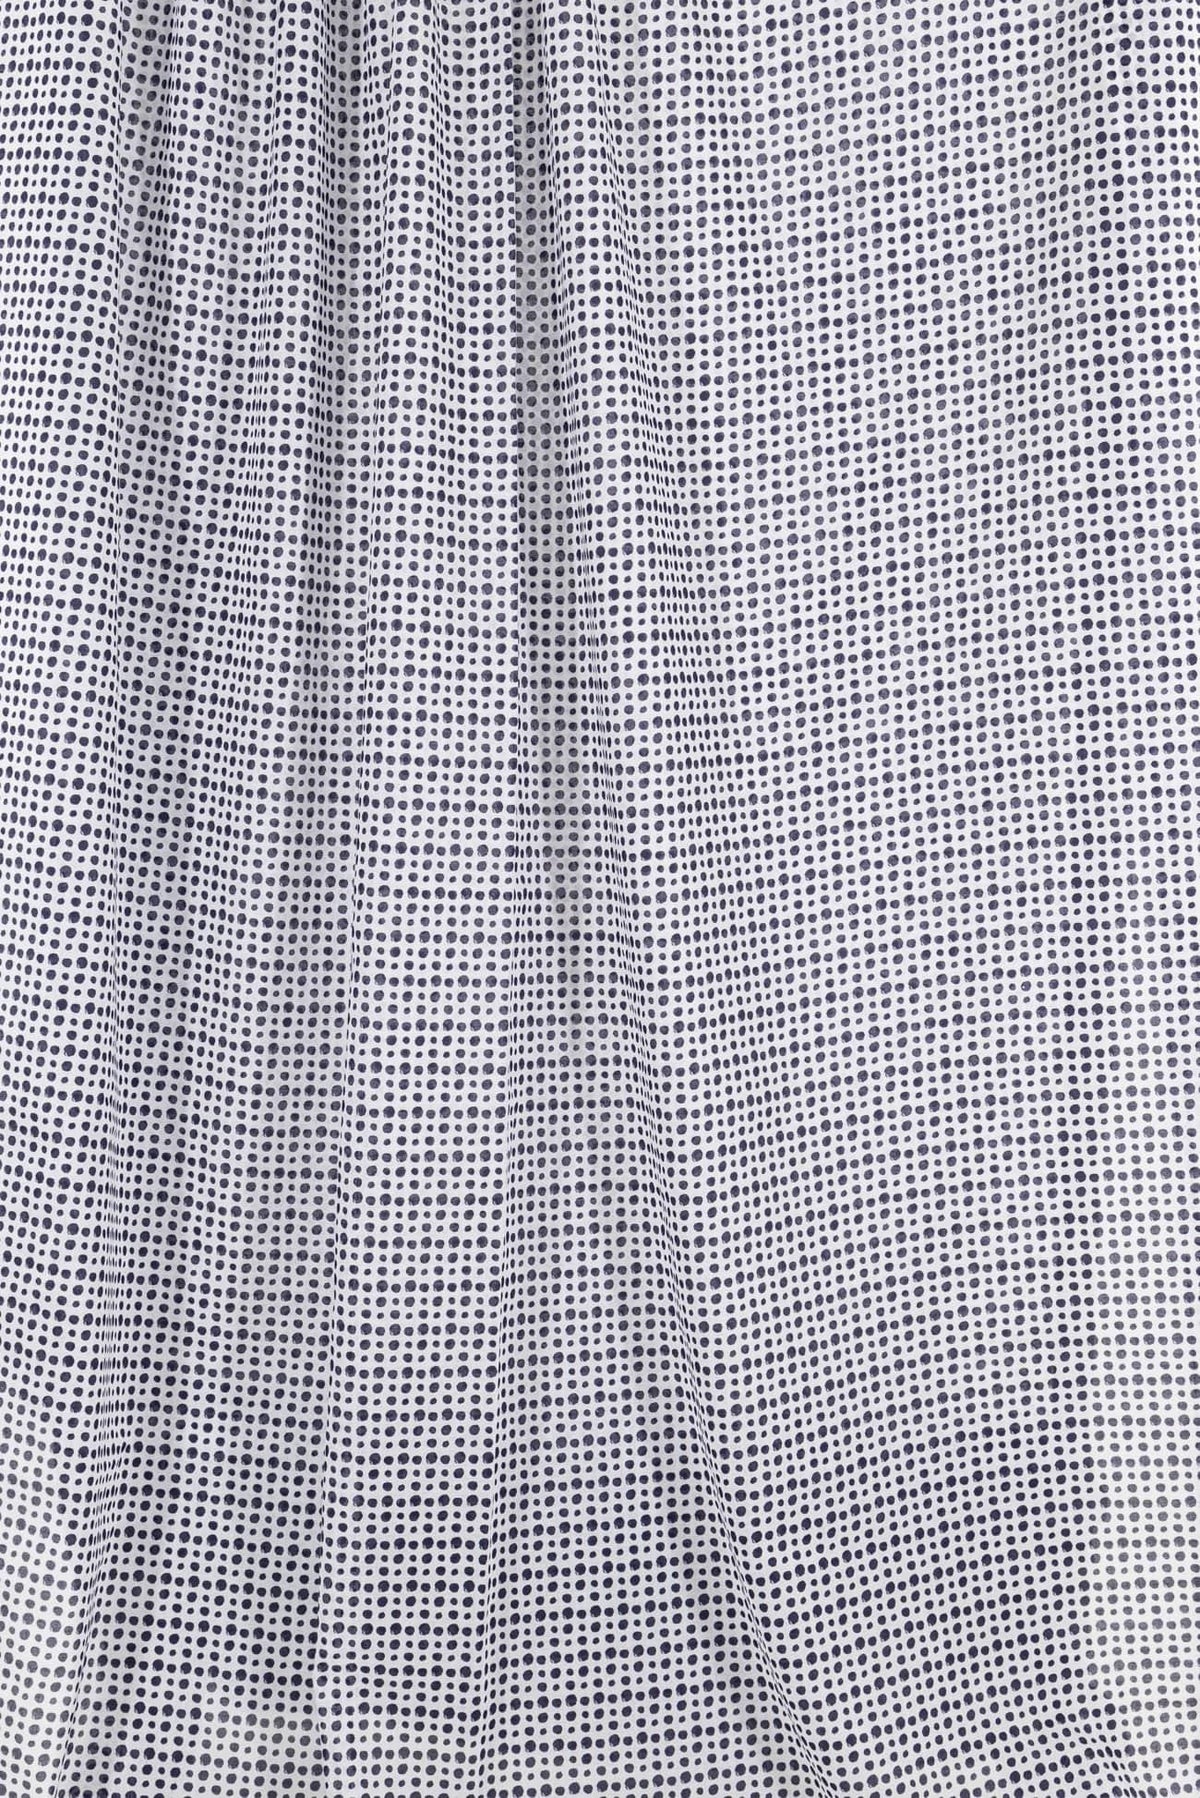 Quirky Blue Dots Cotton Lawn Woven